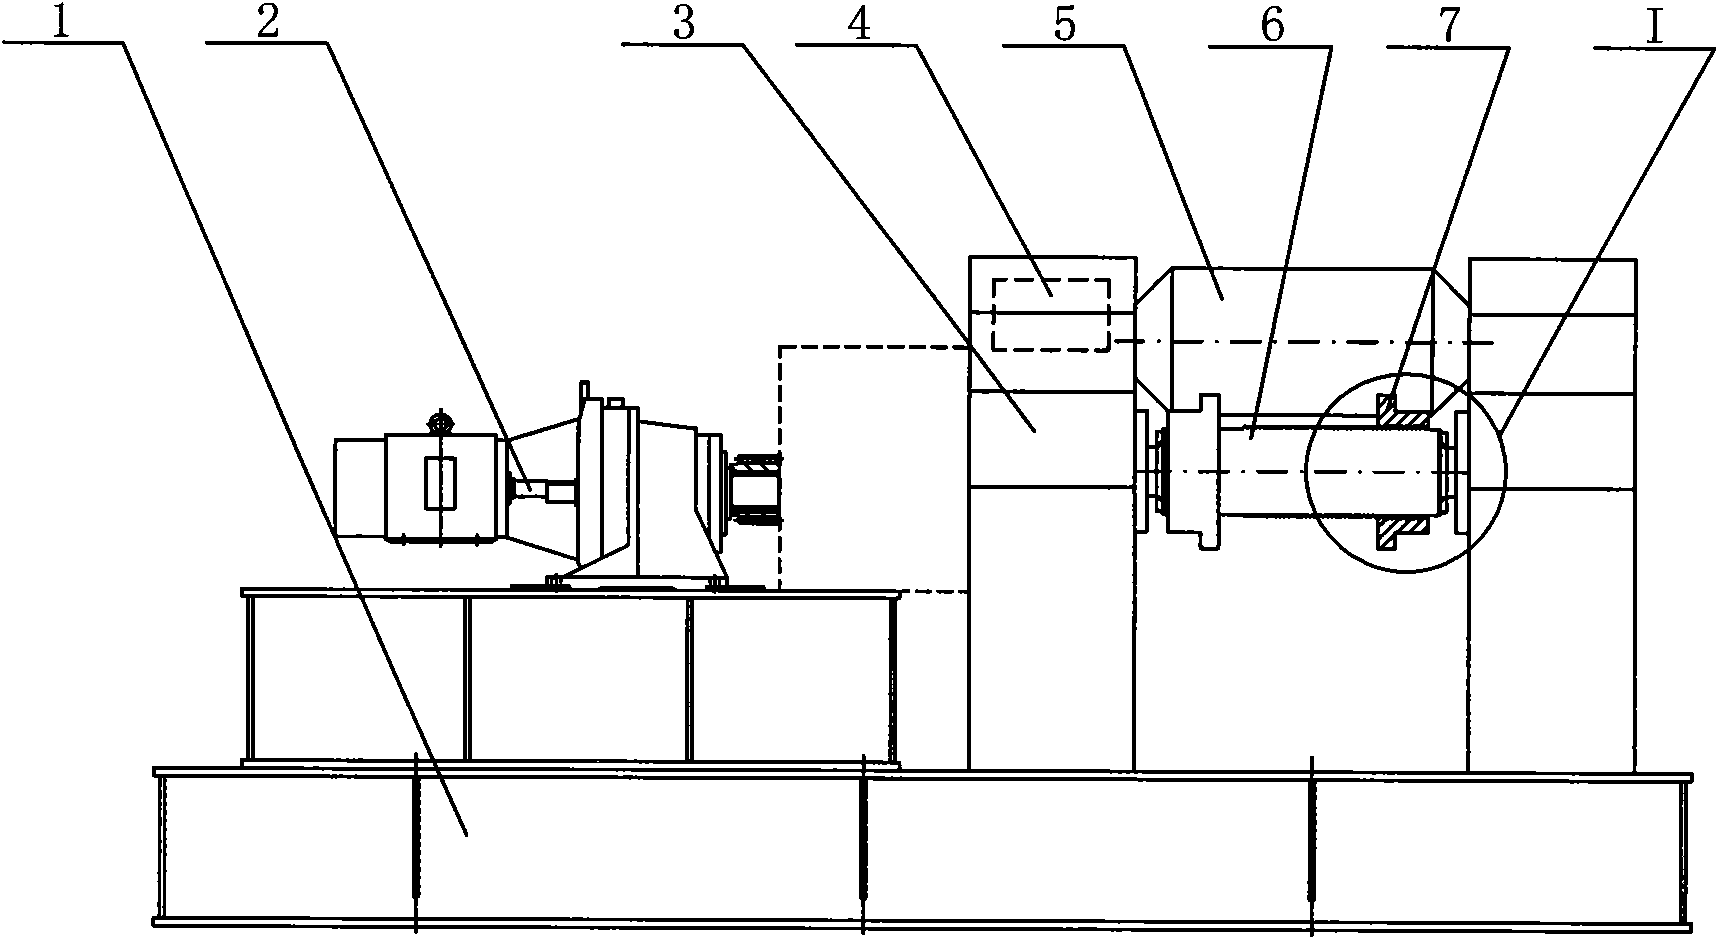 Numerically controlled universal flange machine